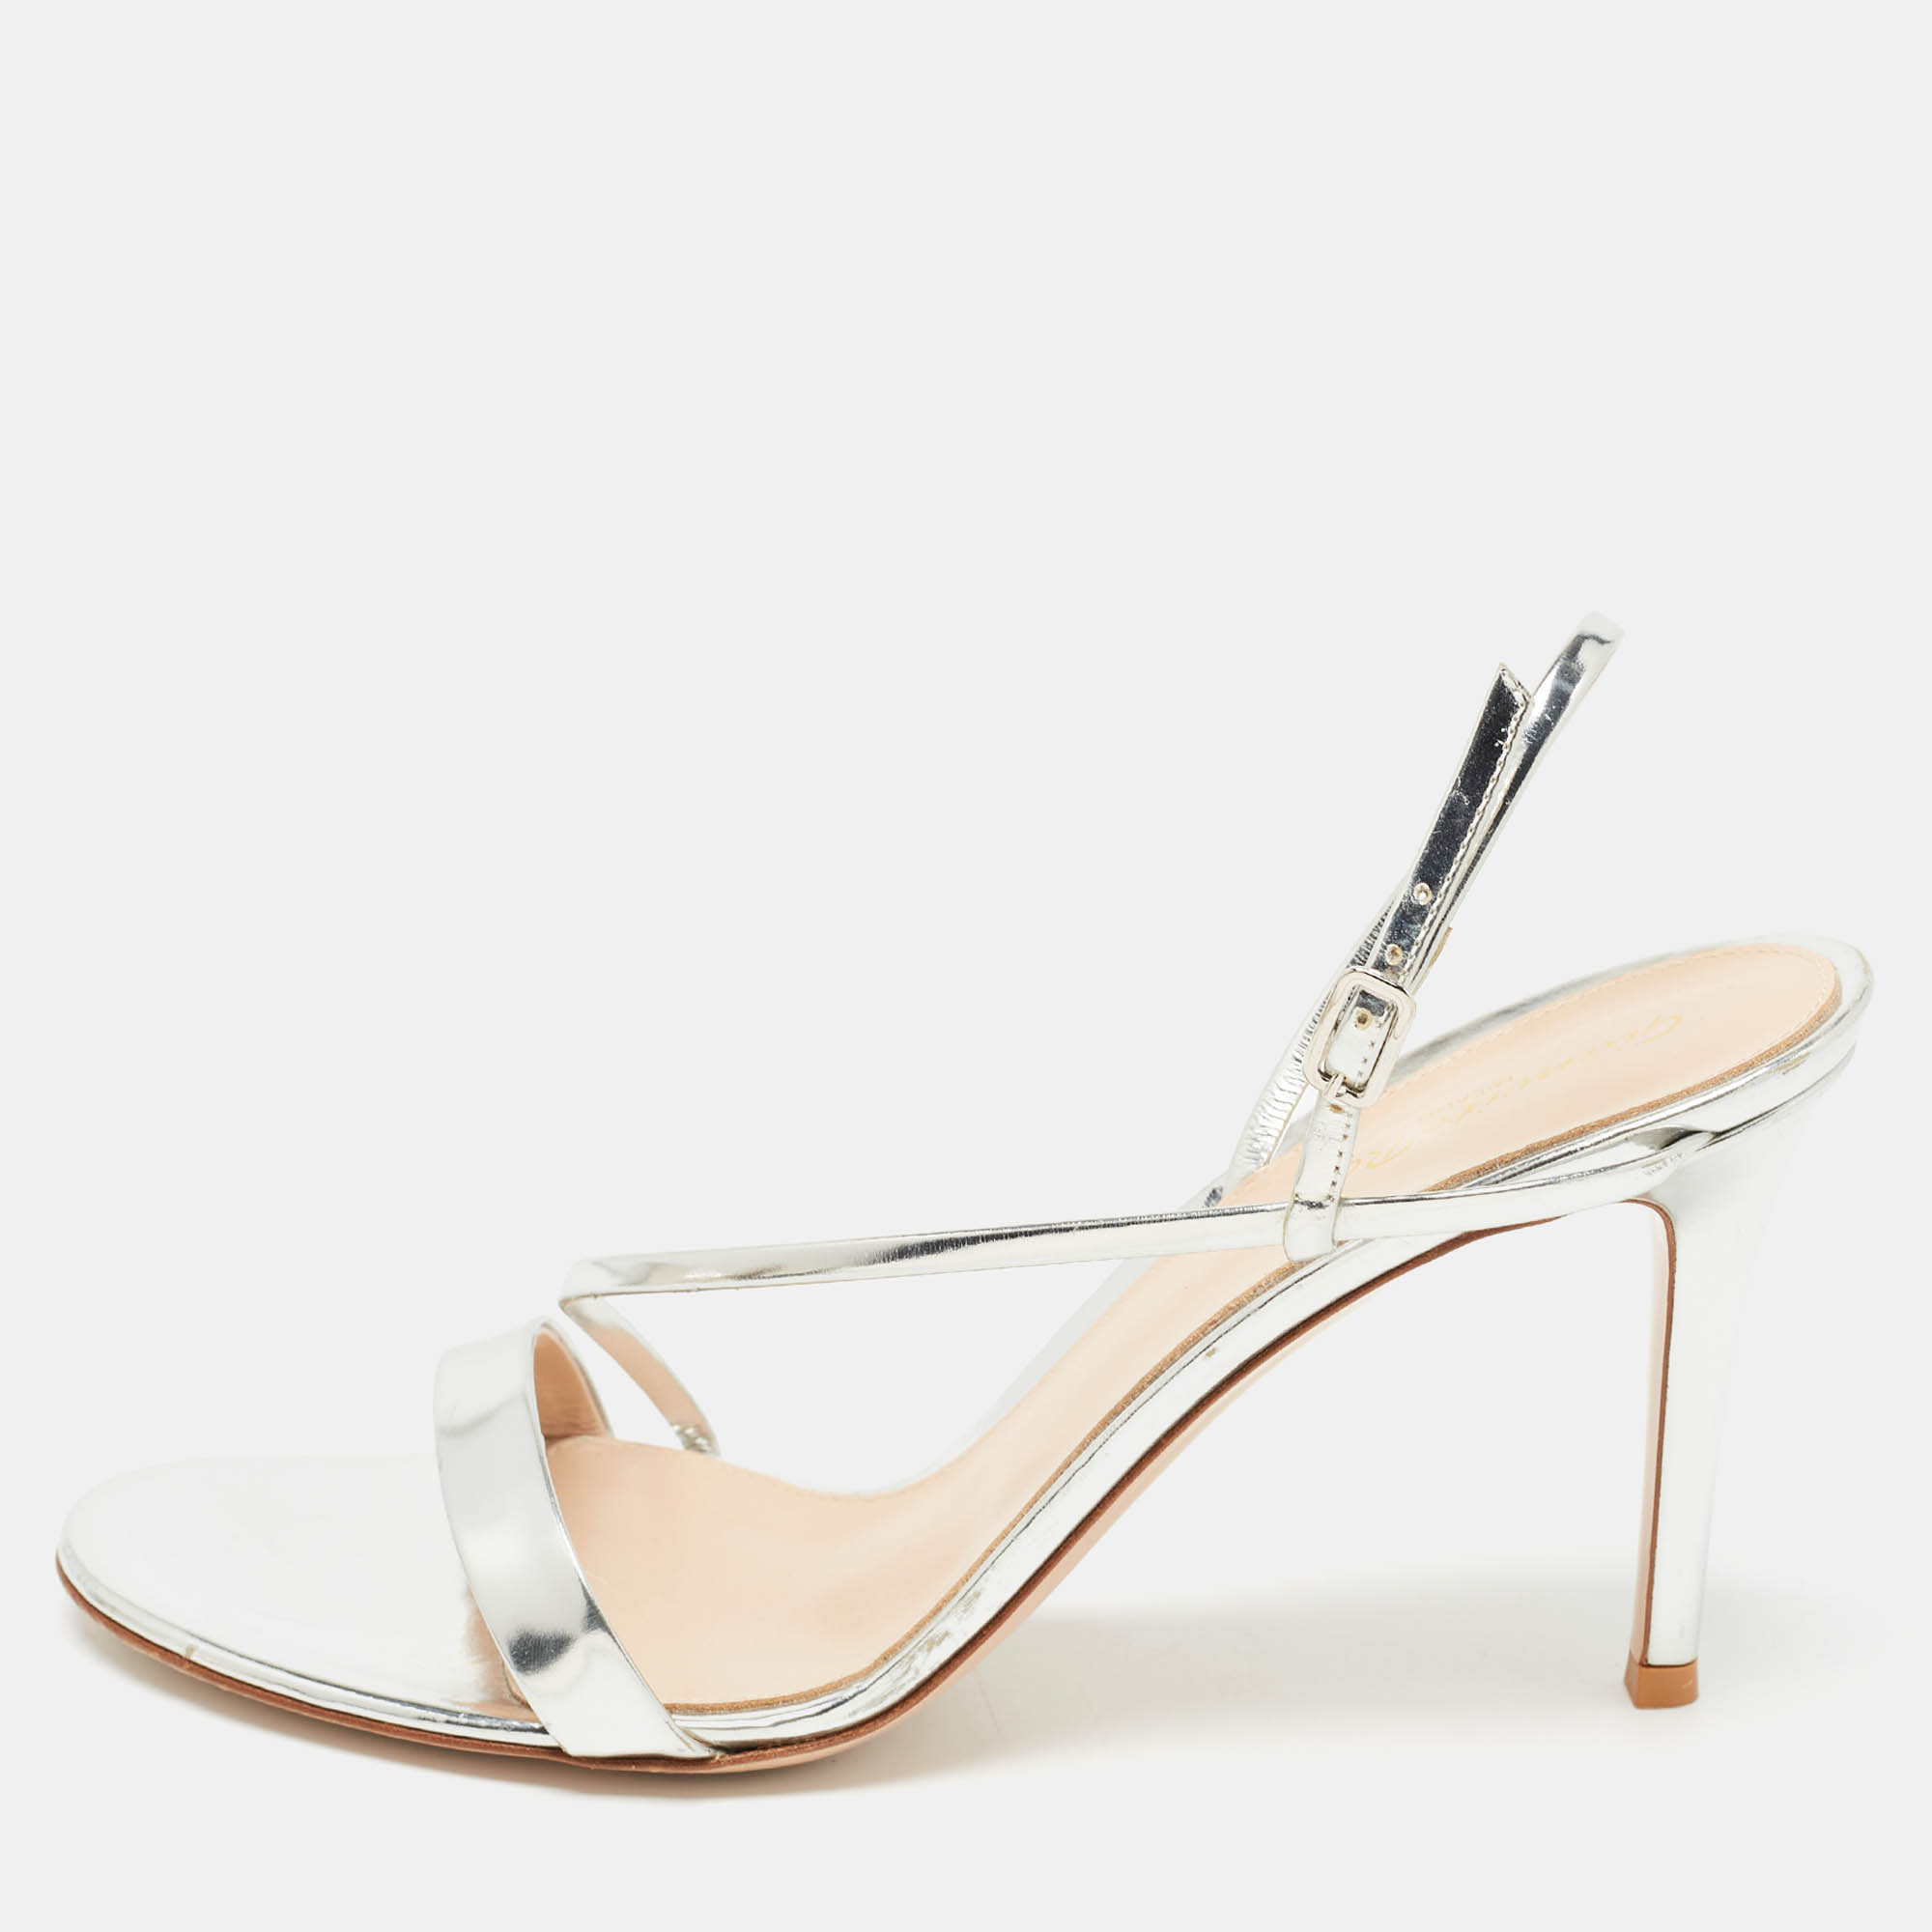 Gianvito Rossi Silver Leather Ankle Strap Sandals Size 40